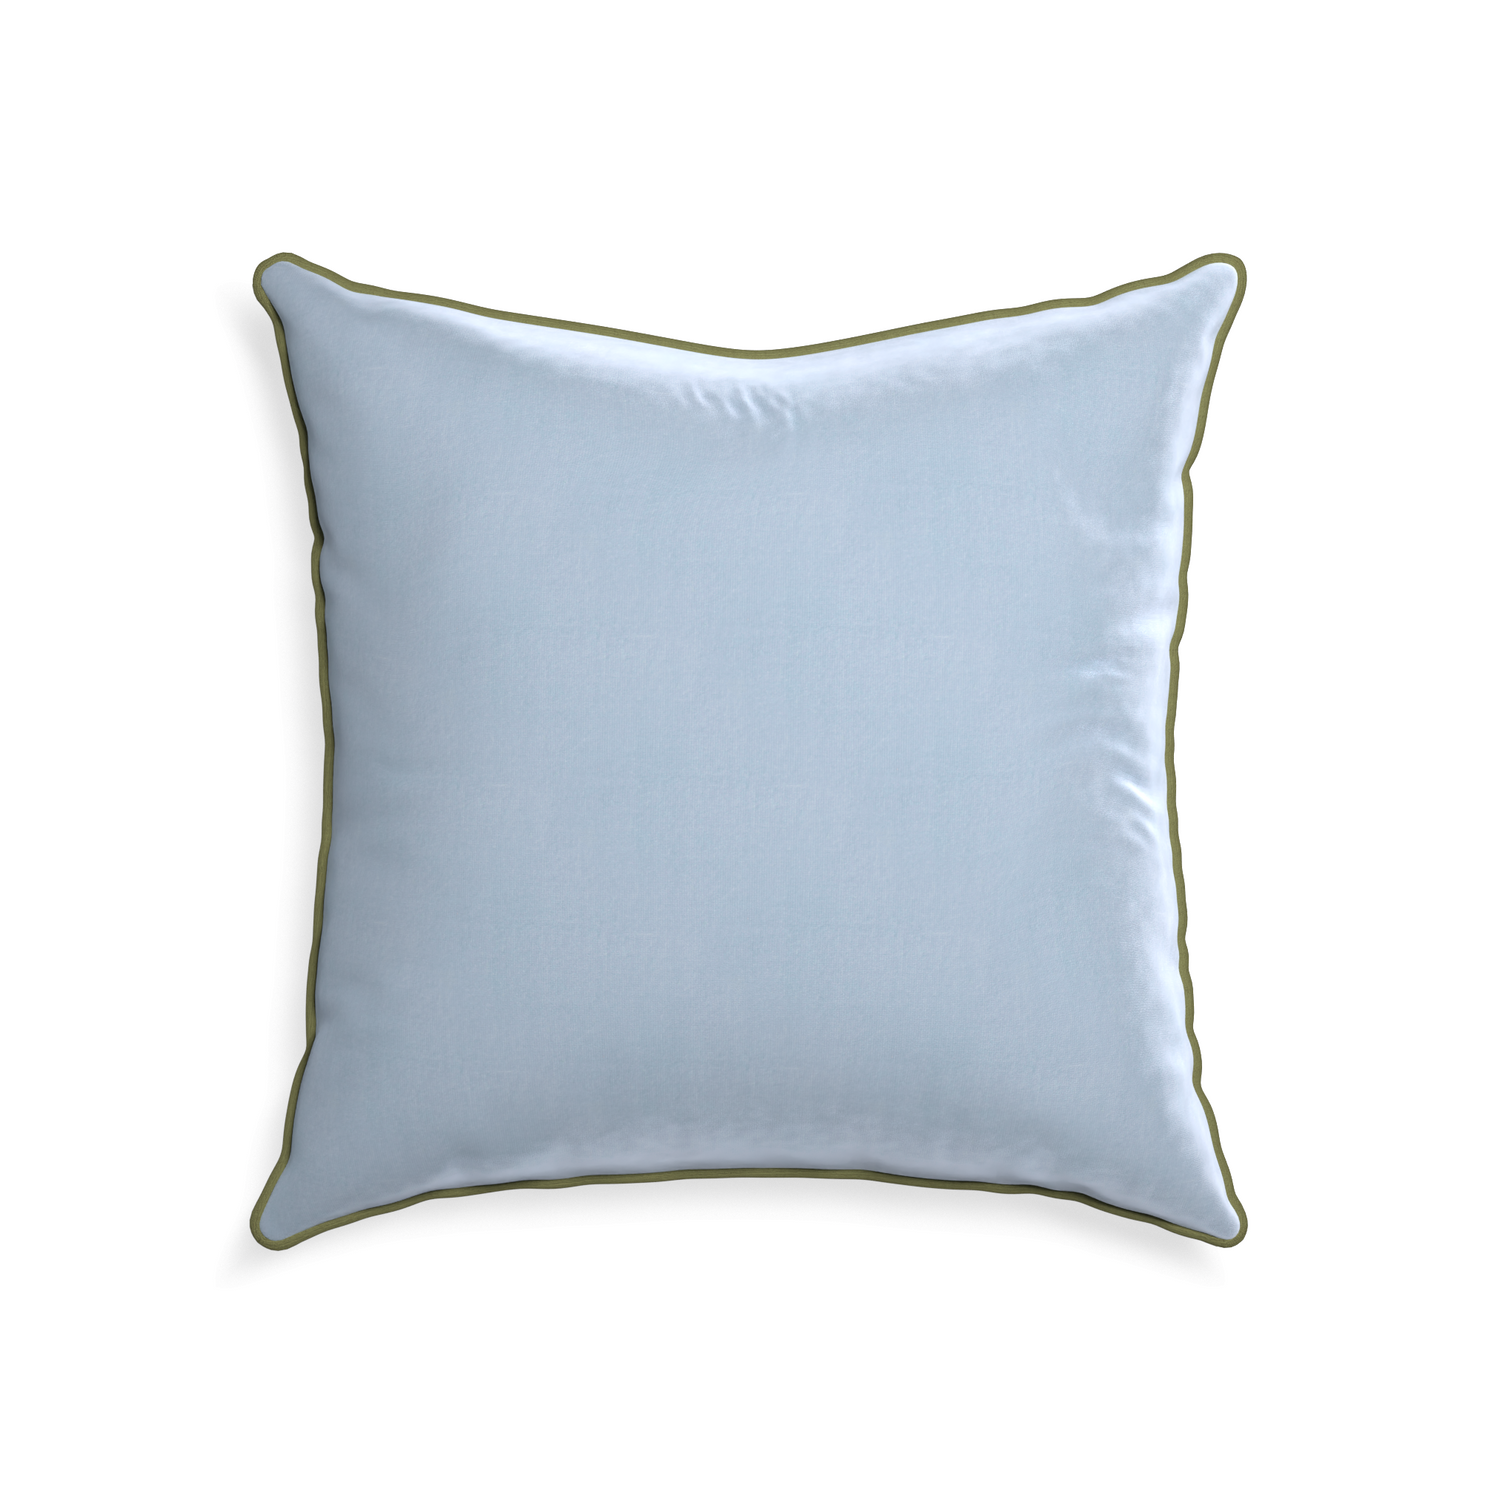 square light blue velvet pillow with moss green piping